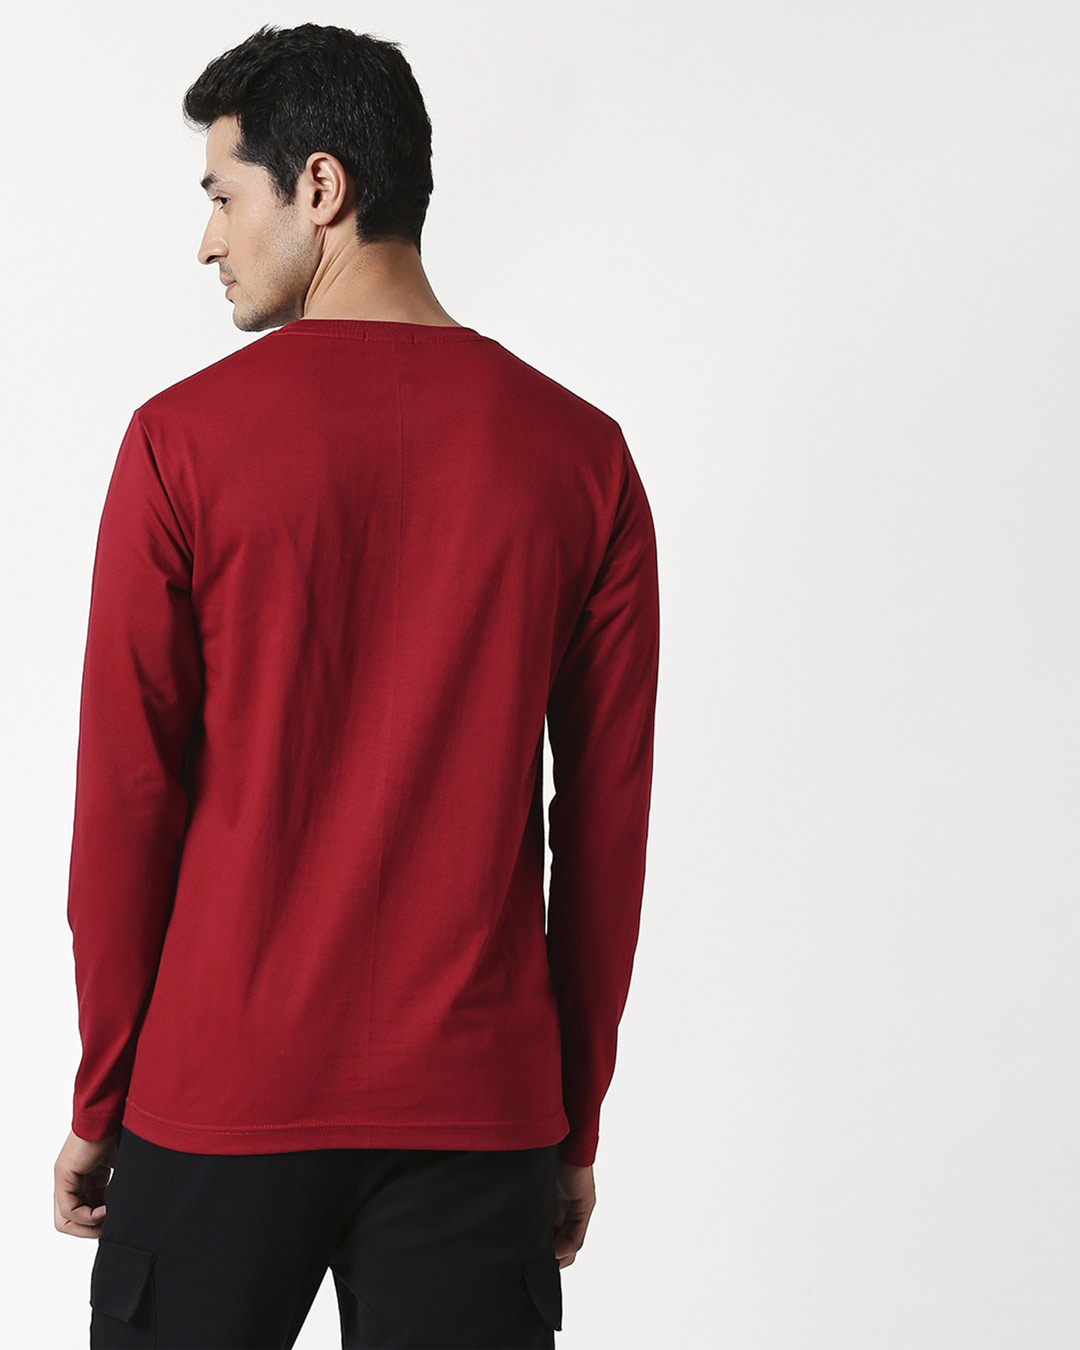 Shop Weedon't Full Sleeve T-Shirt Cherry Red-Back